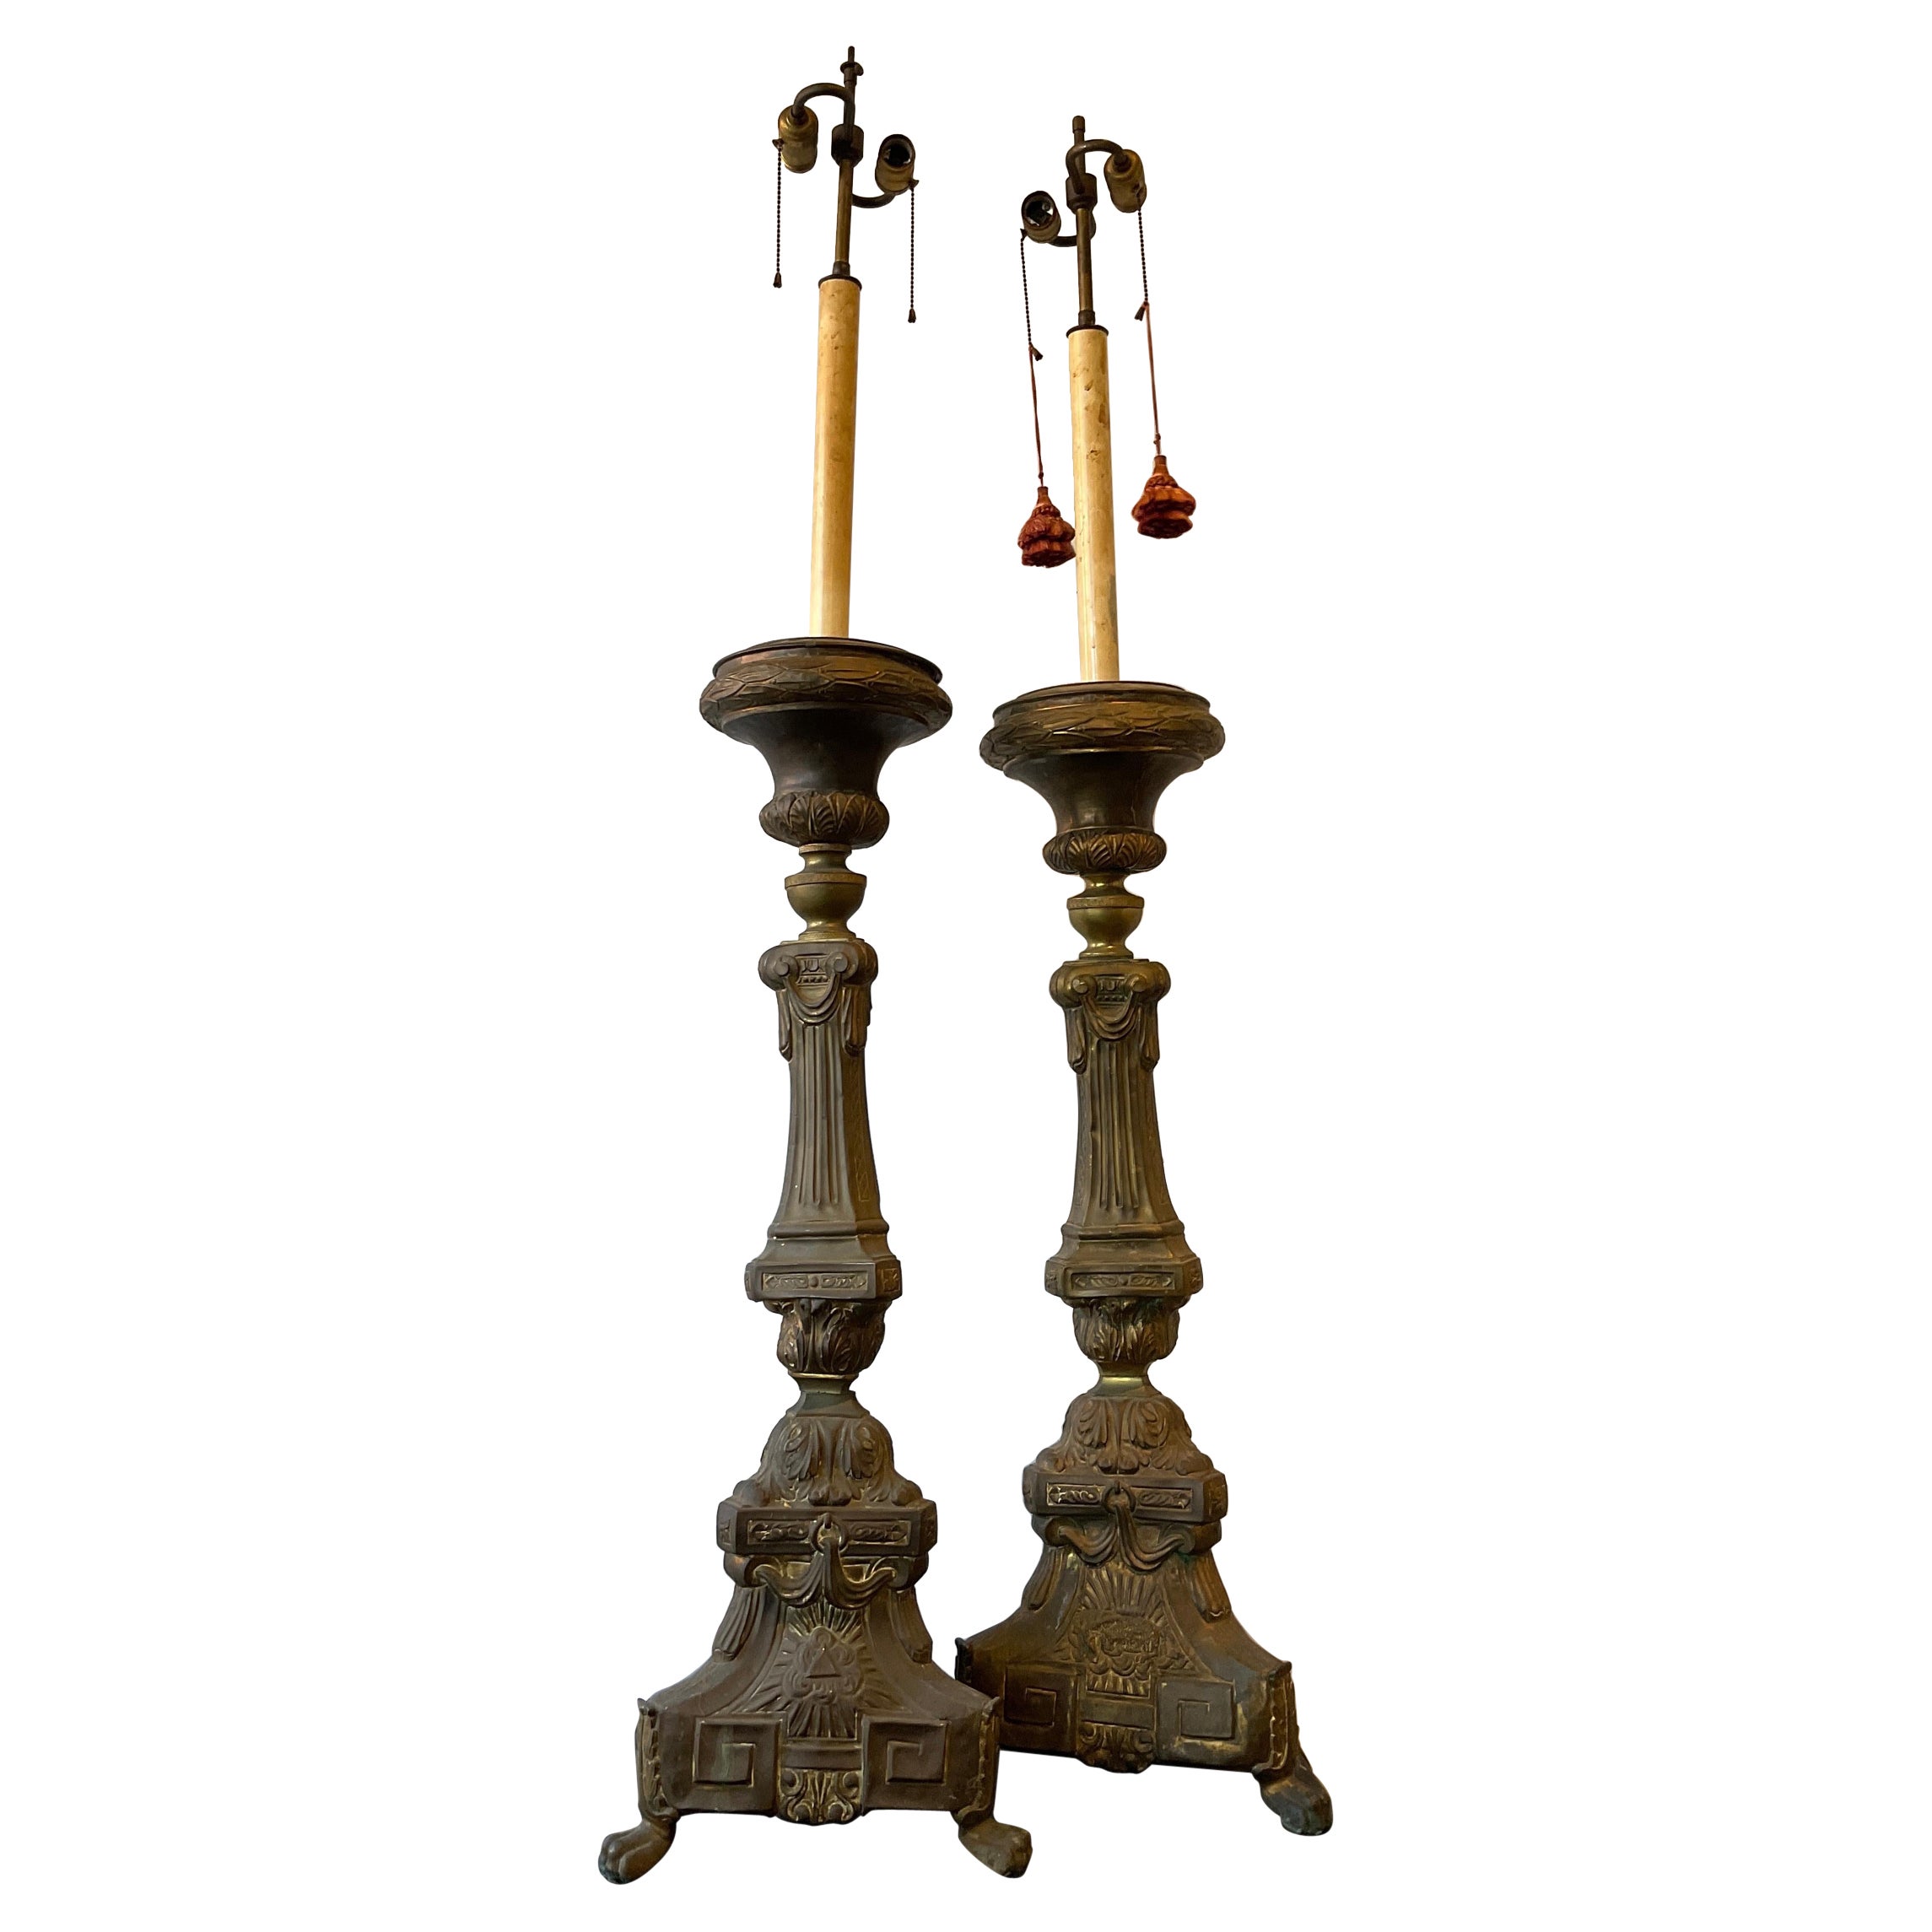 Pair of Tall 1870s Brass Church Candlestick Lamps